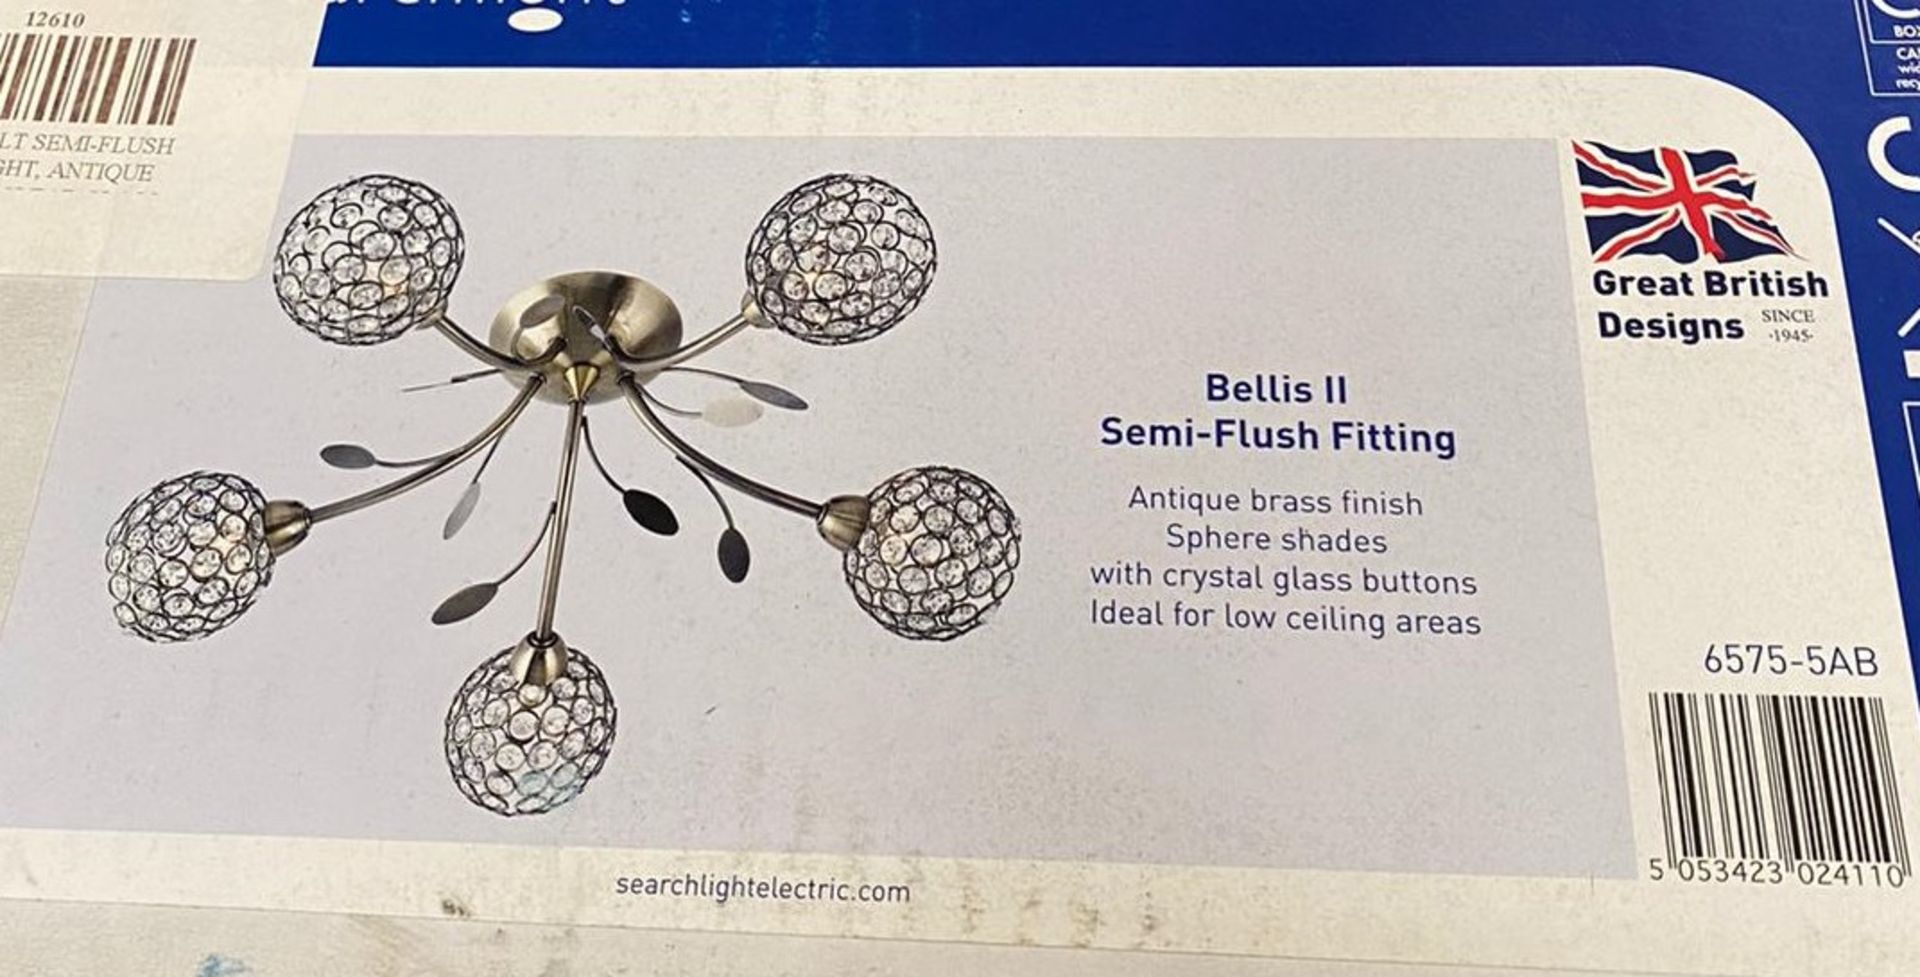 1 x Searchlight Bellis II Semi-Flush Fitting in Antique Brass - Ref: 6575-5AB- New Boxed - RRP: £190